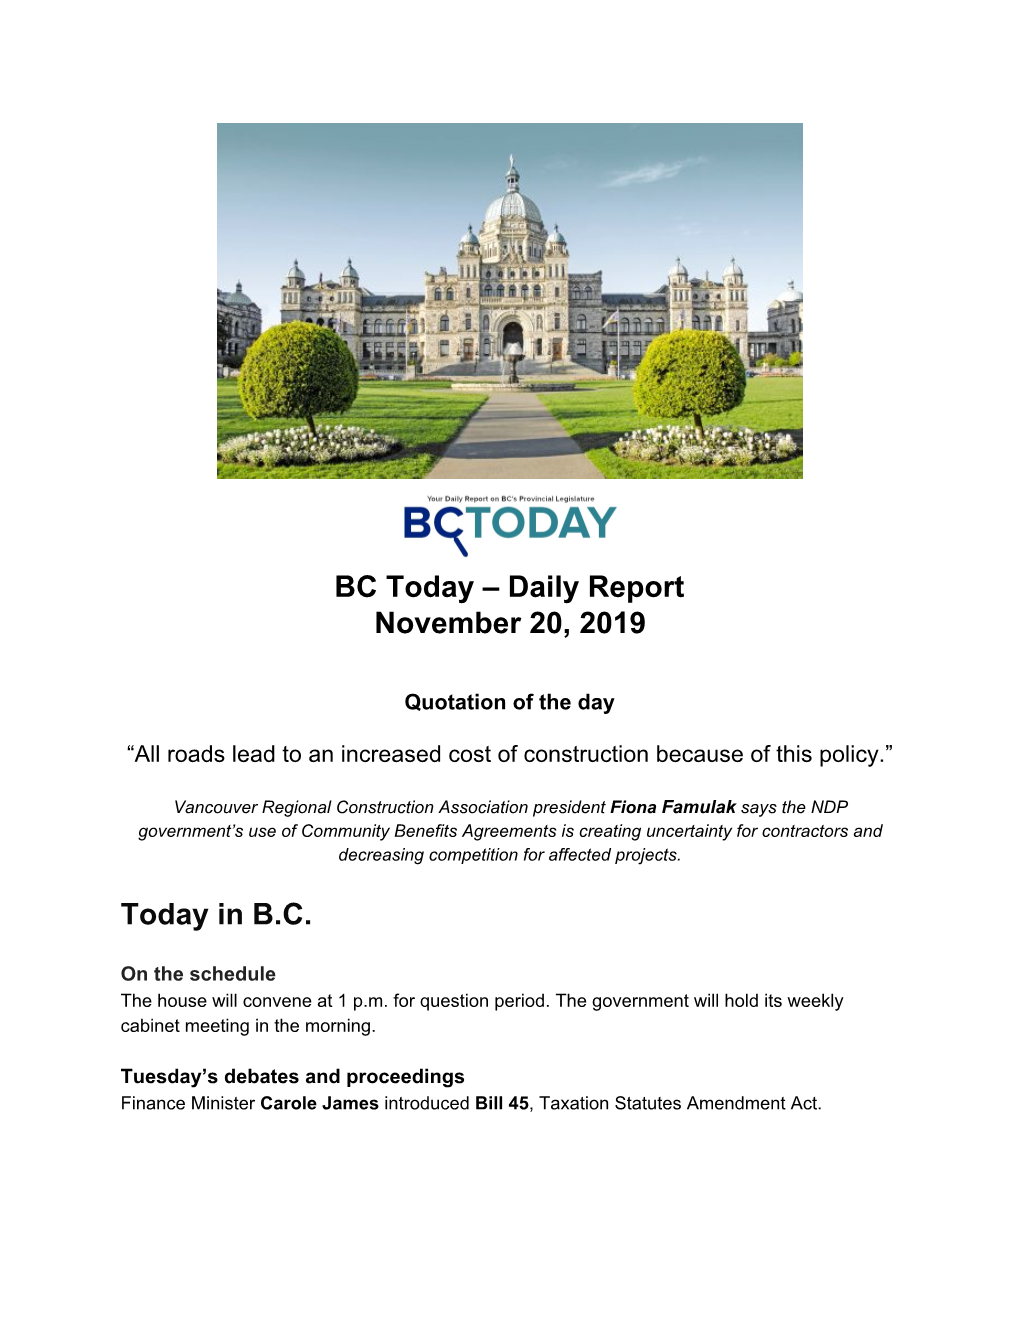 Daily Report November 20, 2019 Today in BC